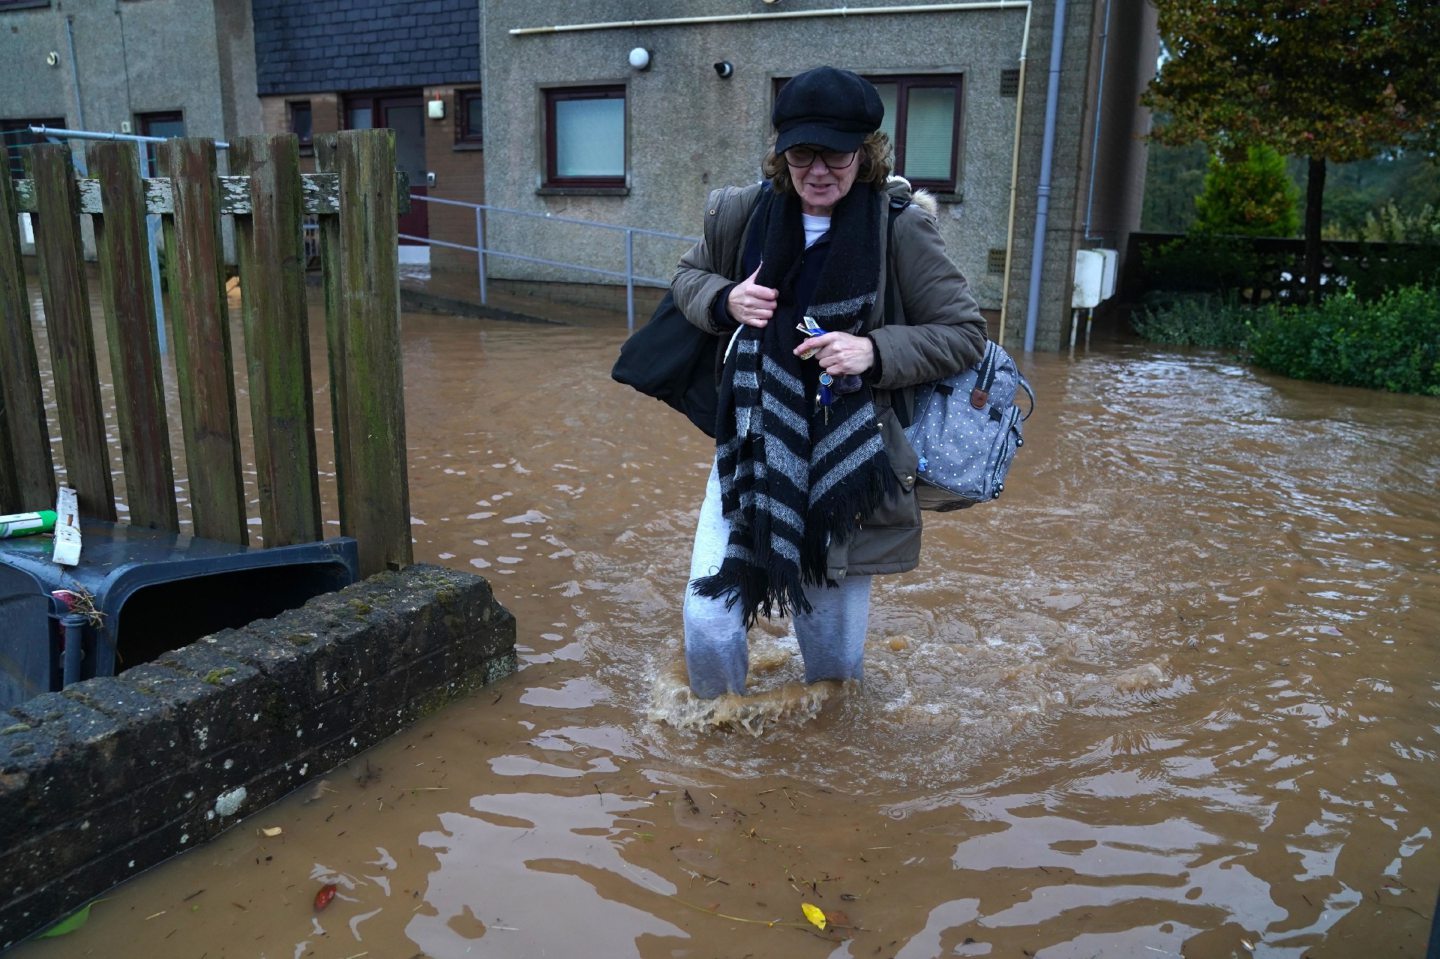 A woman in Brechin makes her way through the floods.